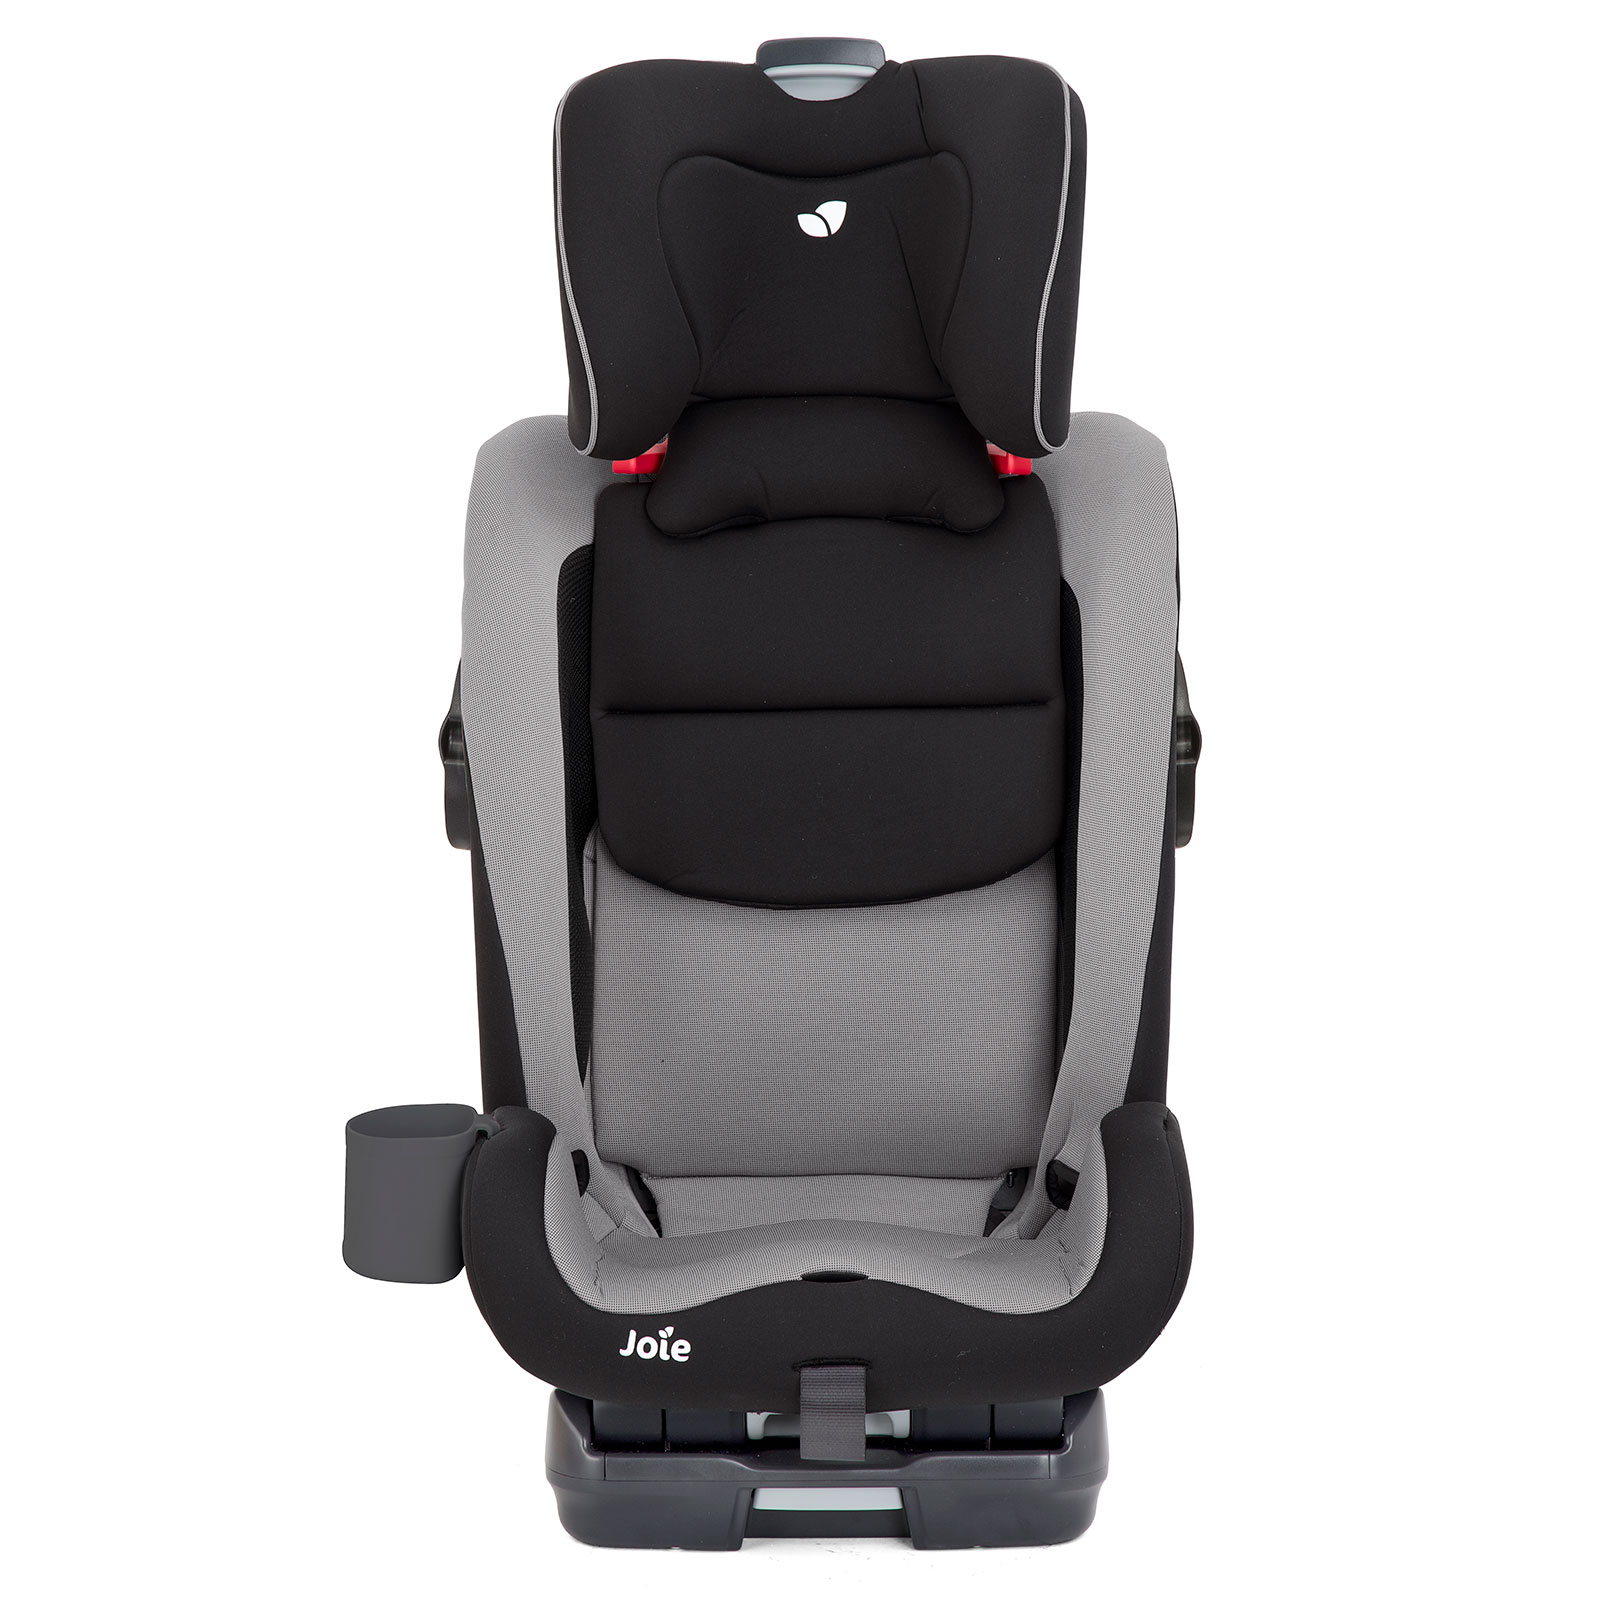 Joie Bold Isofix Booster Carseat (9-36kg)